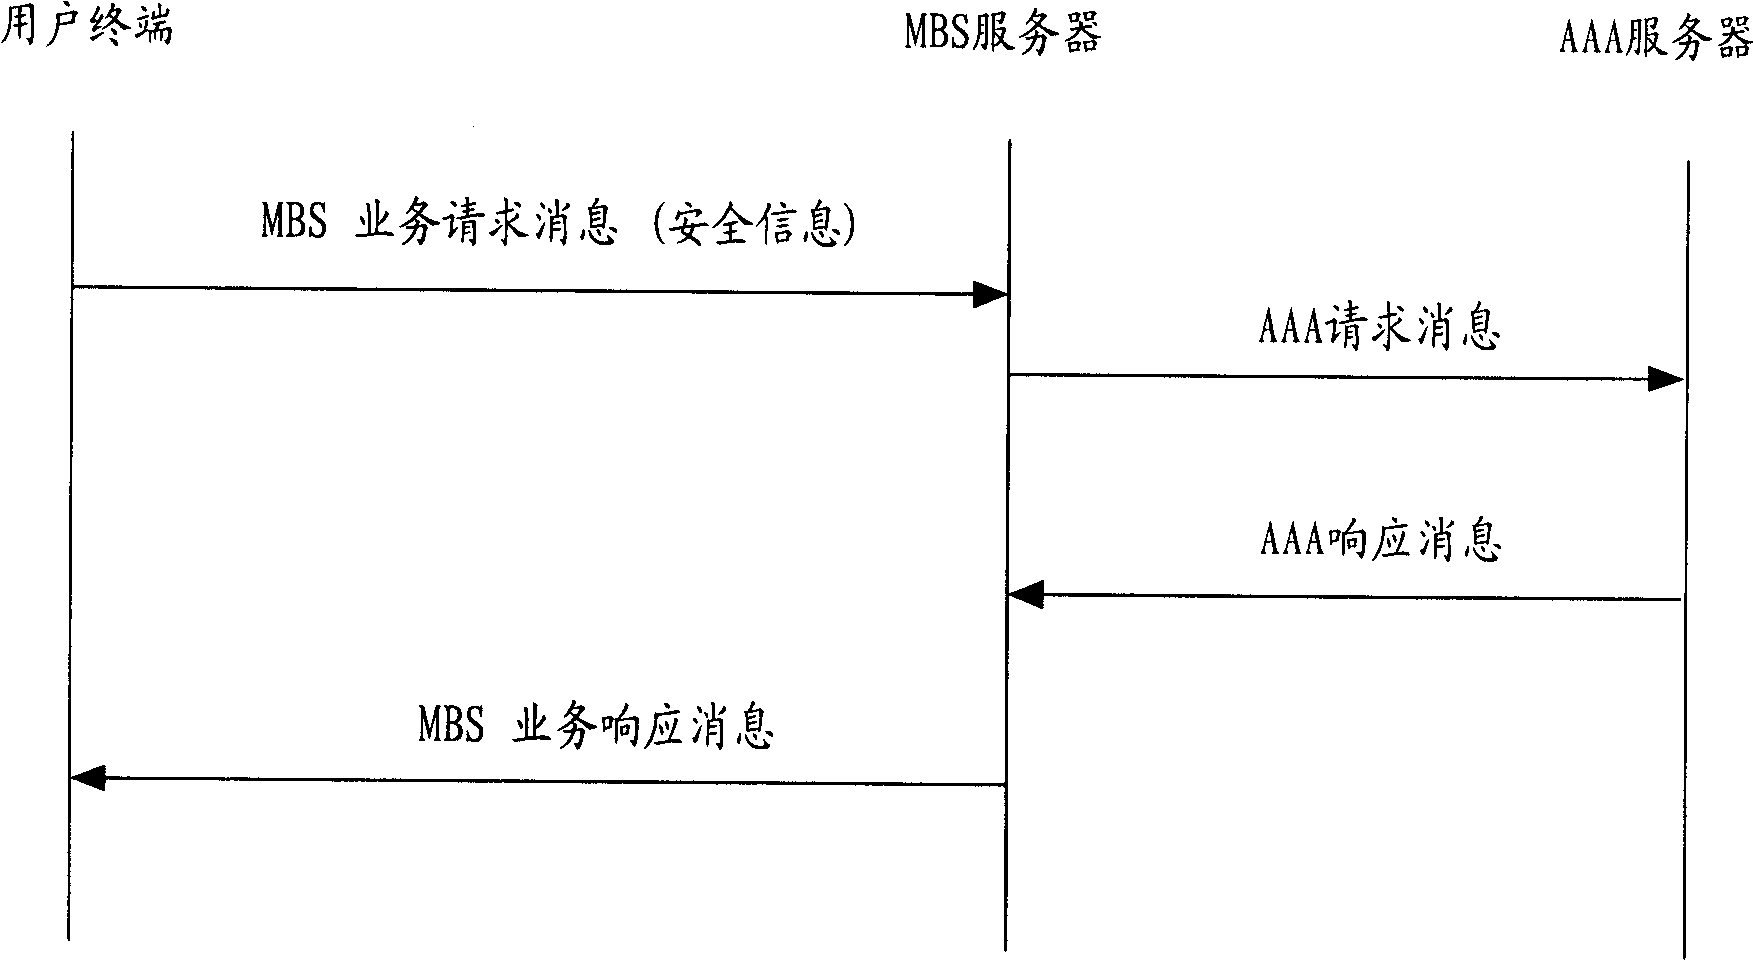 Method and system for multicast and broadcast service authentication and authorization